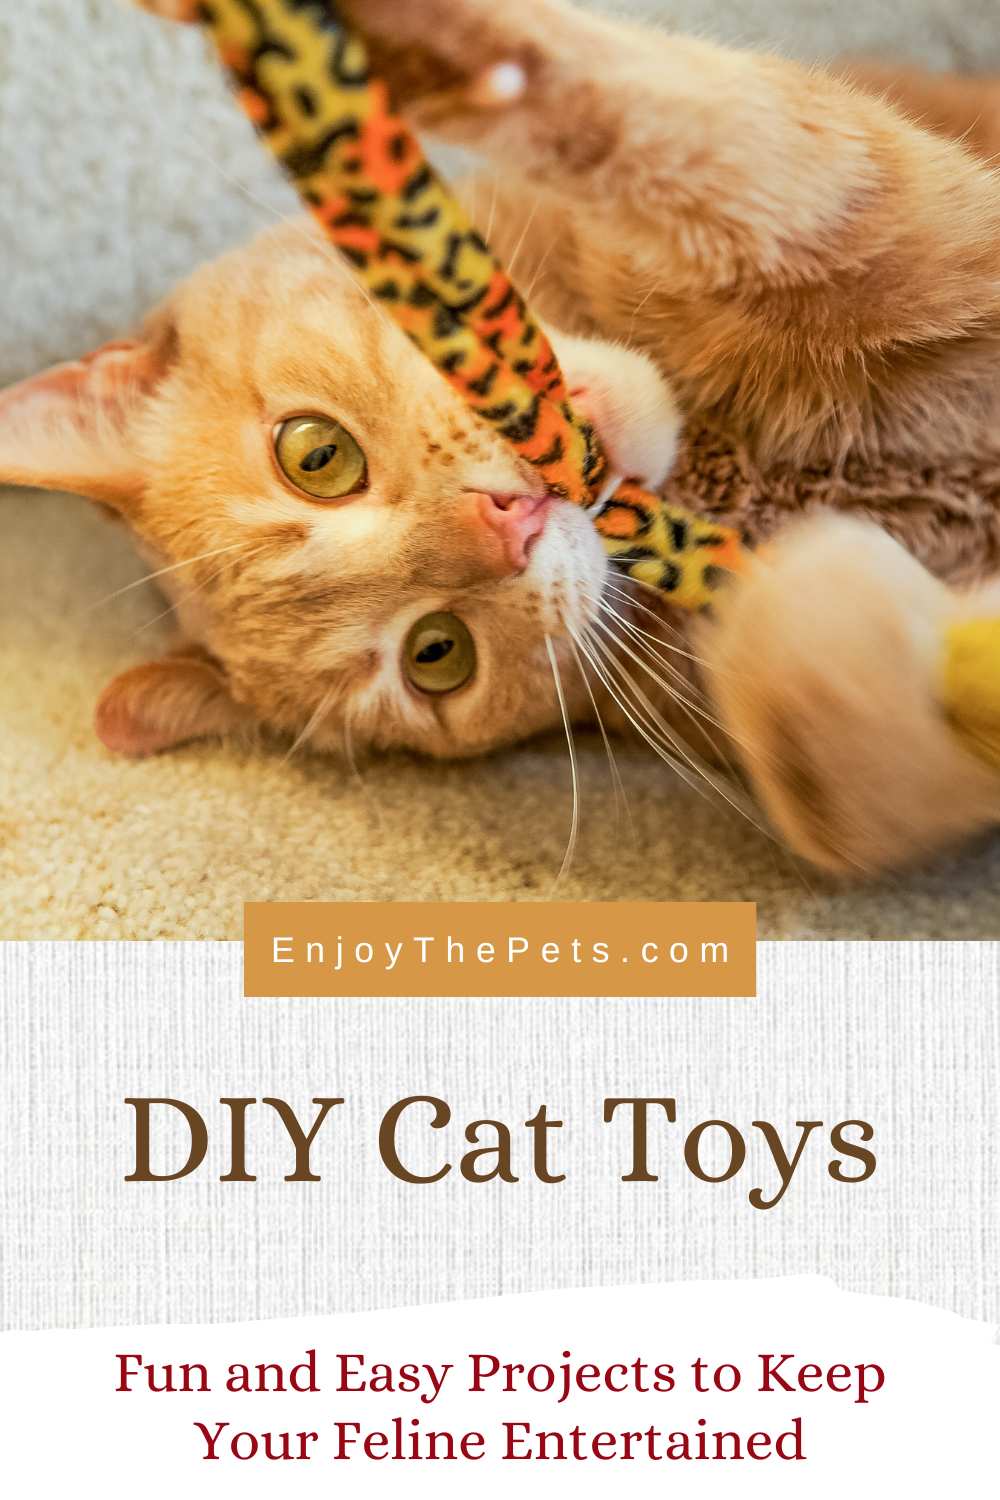 DIY Cat Toys Fun and Easy Projects to Keep Your Feline Entertained